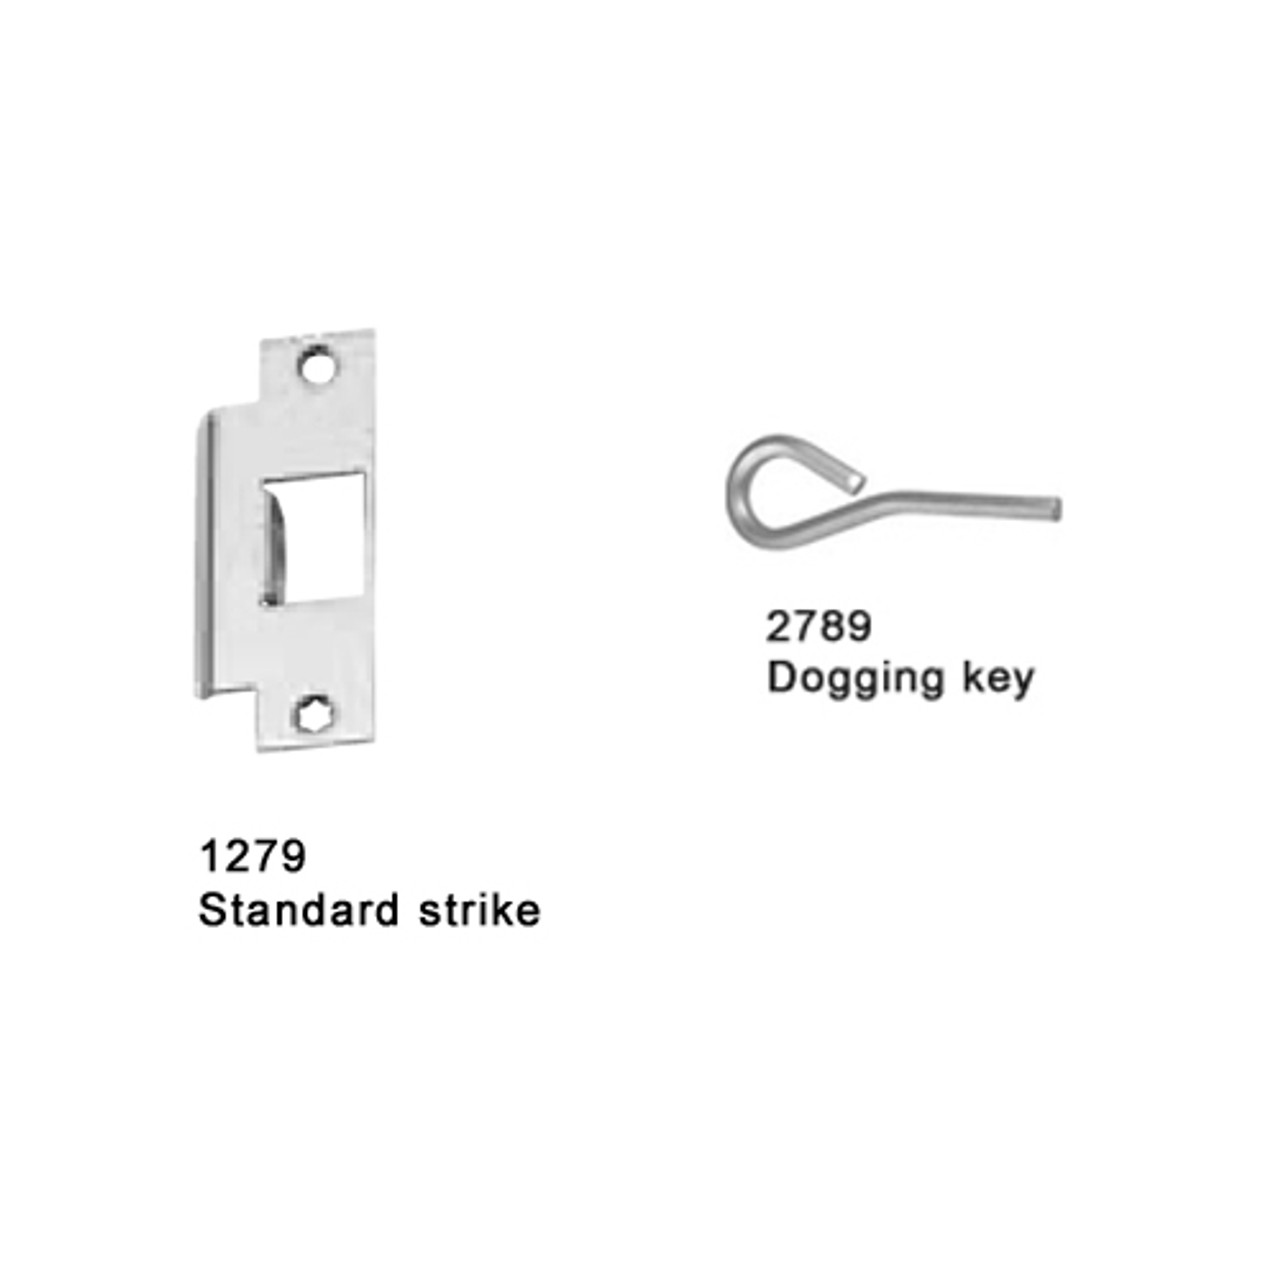 25-M-L-DT-DANE-US3-3-RHR Falcon 25 Series Mortise Lock Devices 510L-DT Dane Lever Trim with Dummy Trim in Polished Brass